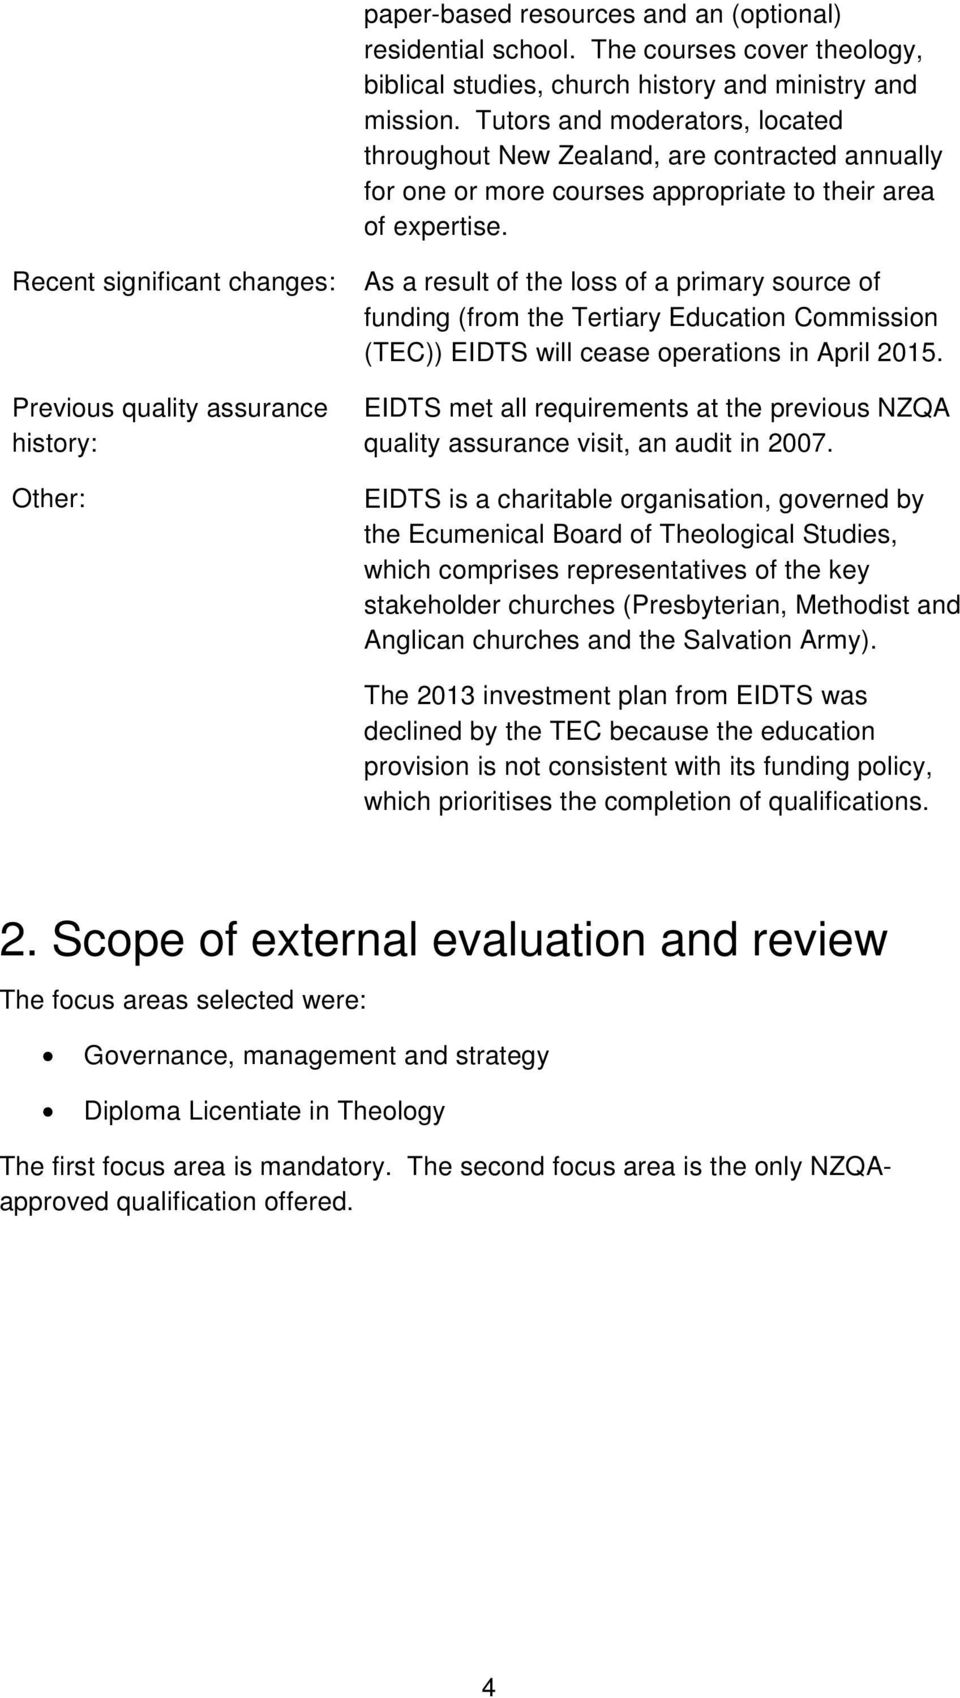 Recent significant changes: Previous quality assurance history: Other: As a result of the loss of a primary source of funding (from the Tertiary Education Commission (TEC)) EIDTS will cease